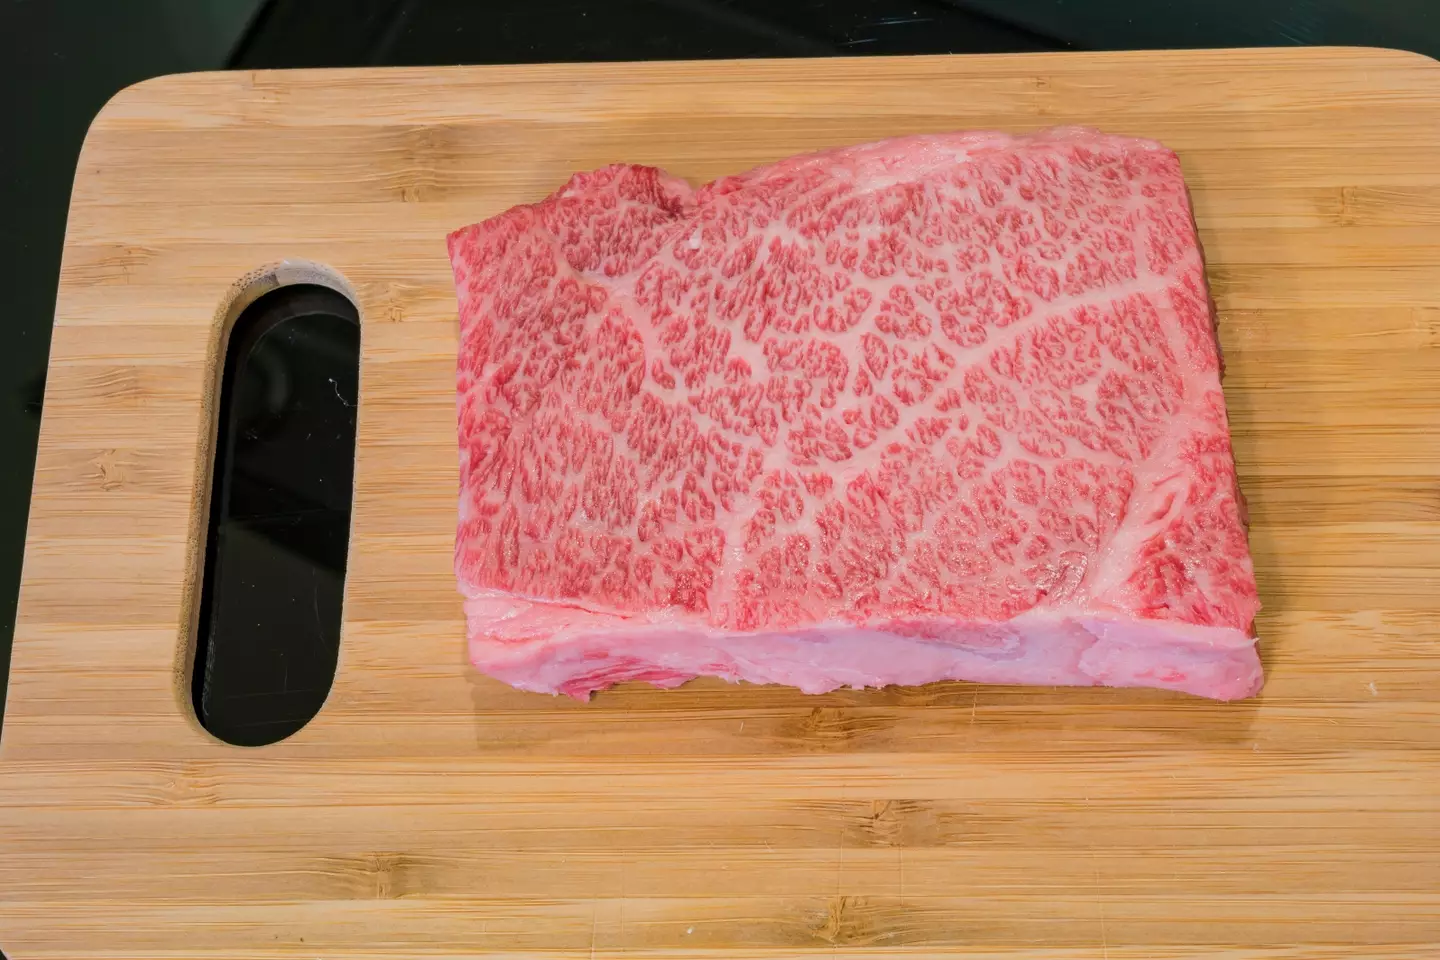 Wagyu steak, you know the really expensive stuff.